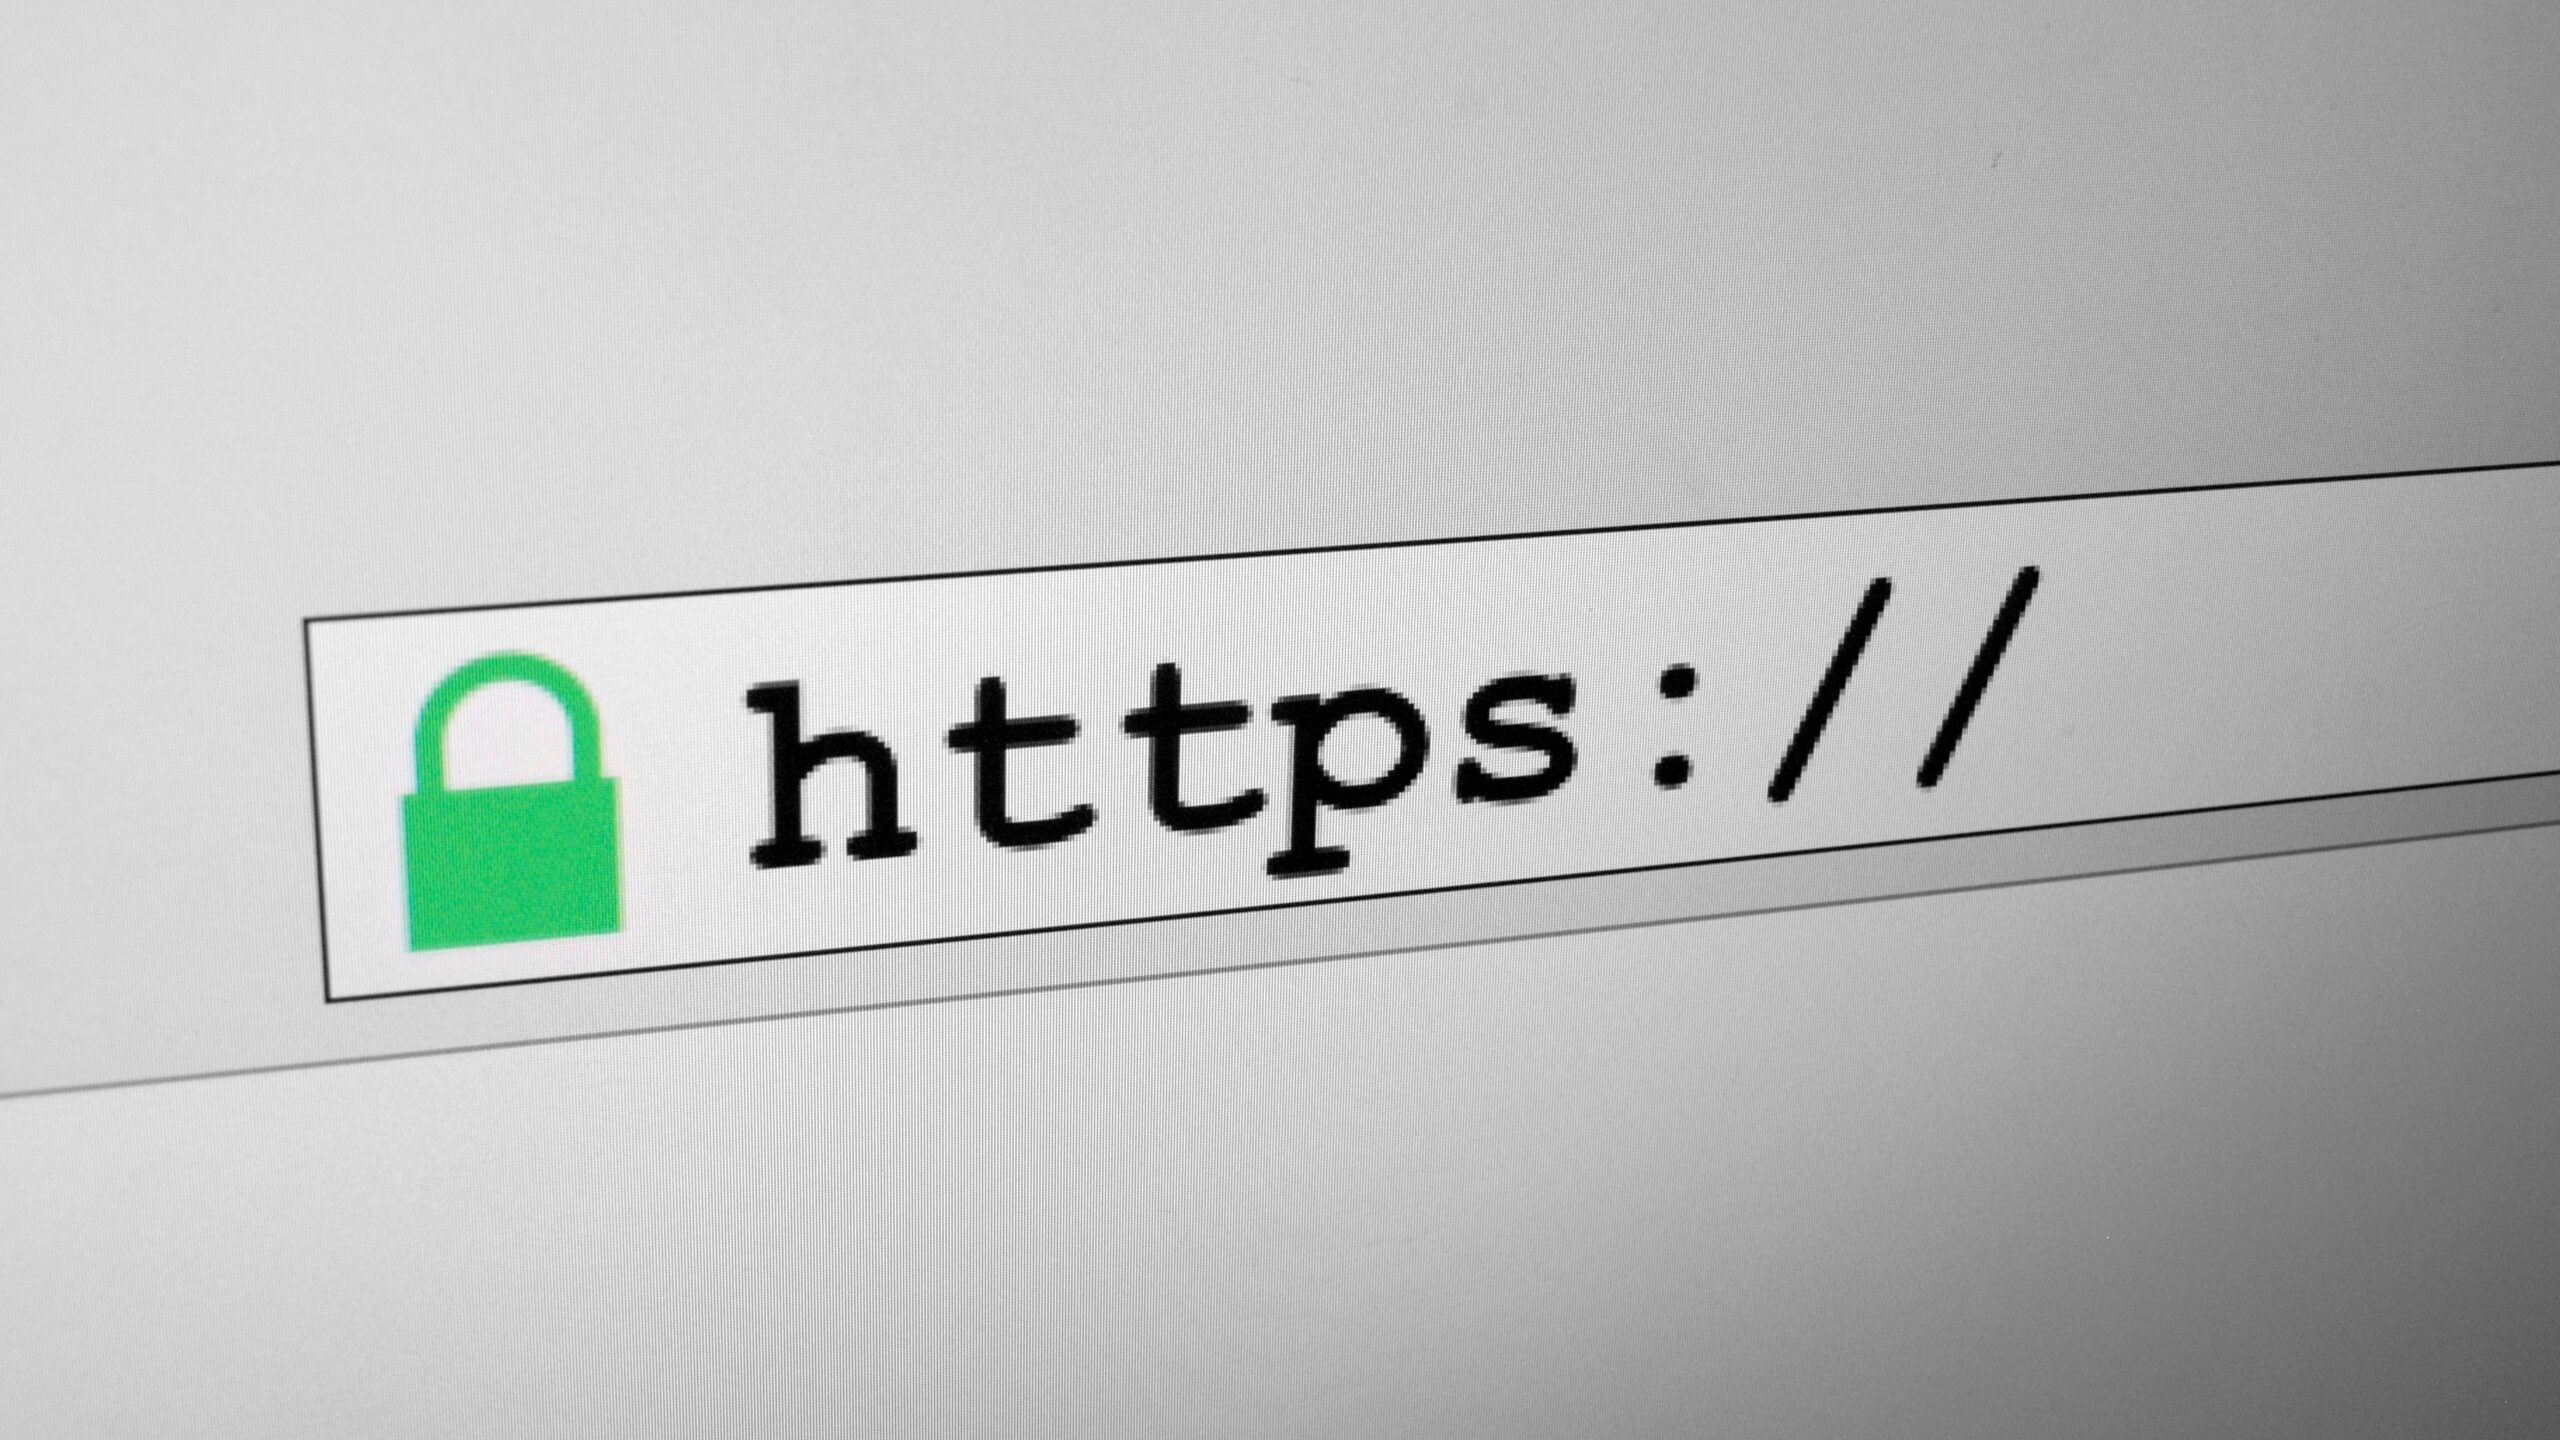 How To Create a Self-Signed SSL Certificate for Nginx in Ubuntu 22.04 LTS